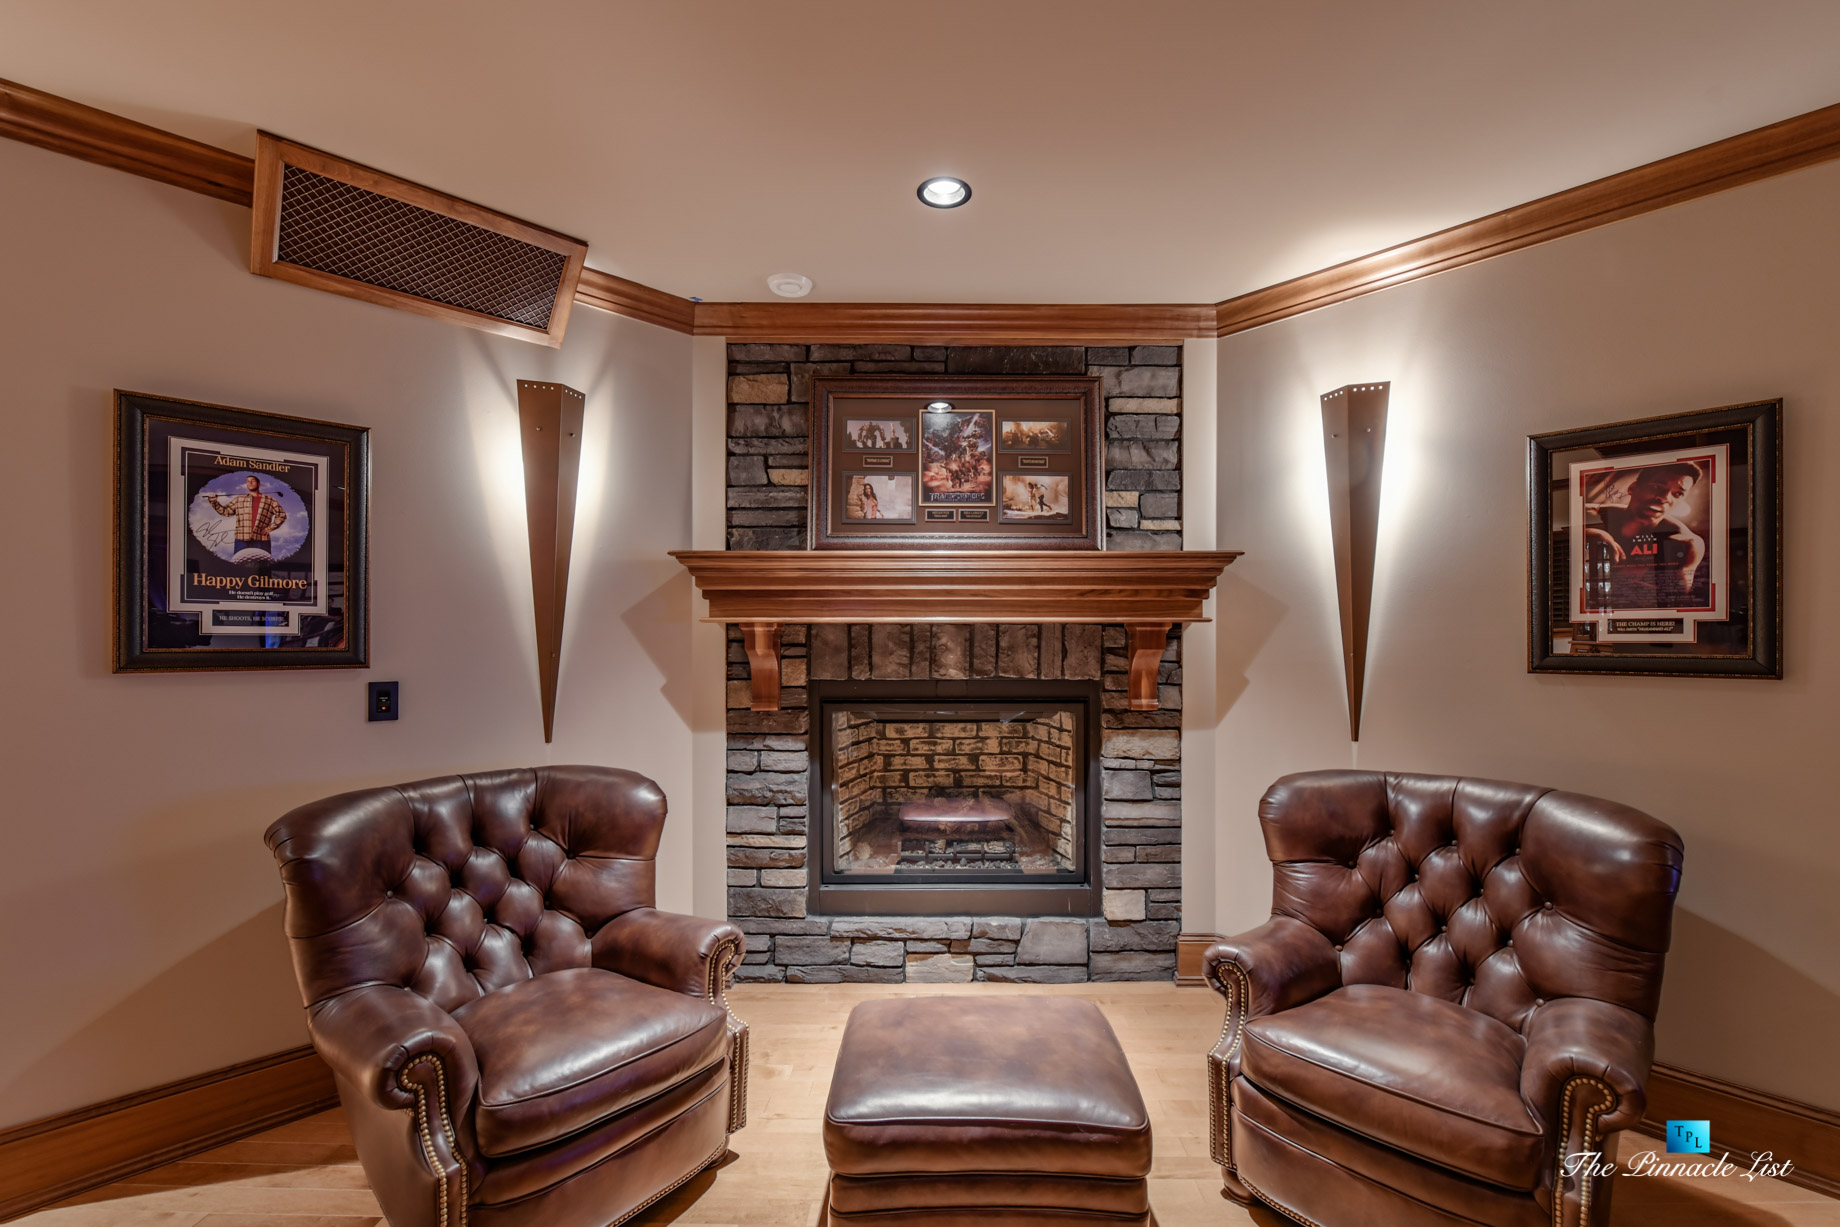 3053 Anmore Creek Way, Anmore, BC, Canada - Basement Man Cave Fireplace and Lounge Chairs - Luxury Real Estate - Greater Vancouver Home